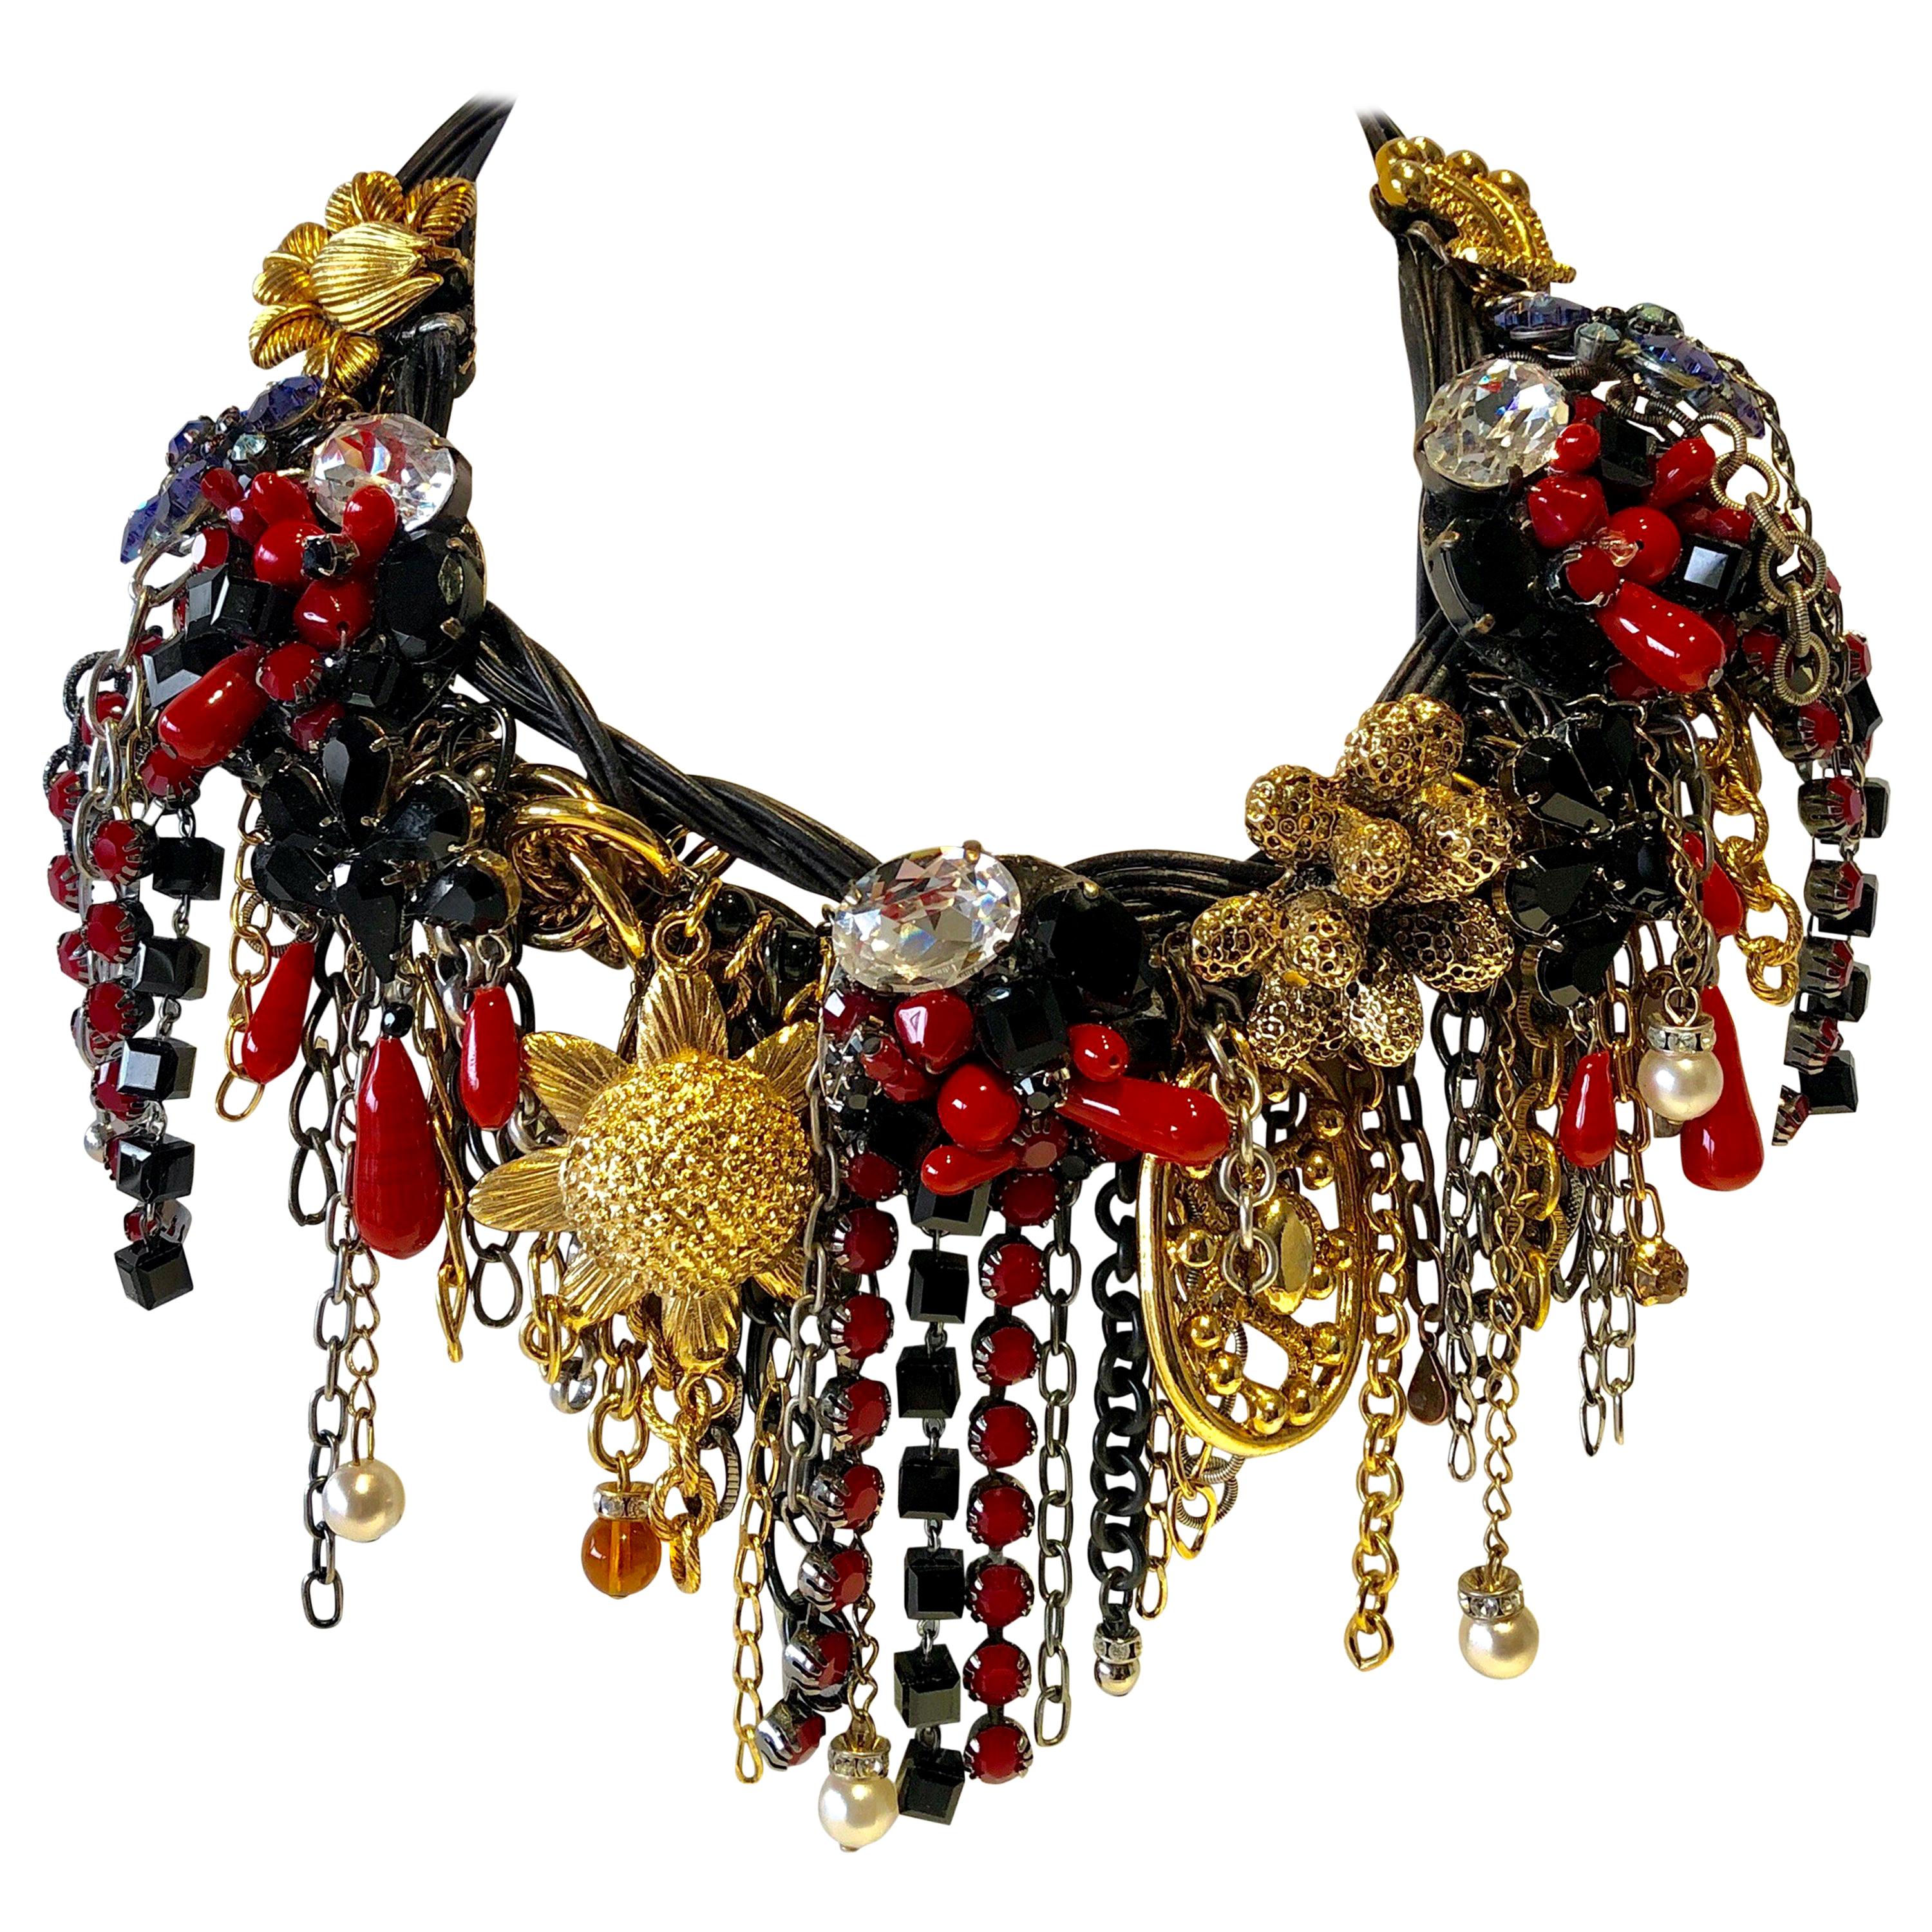 Contemporary Mix Metal and Leather Fringe Statement Necklace “Collier”